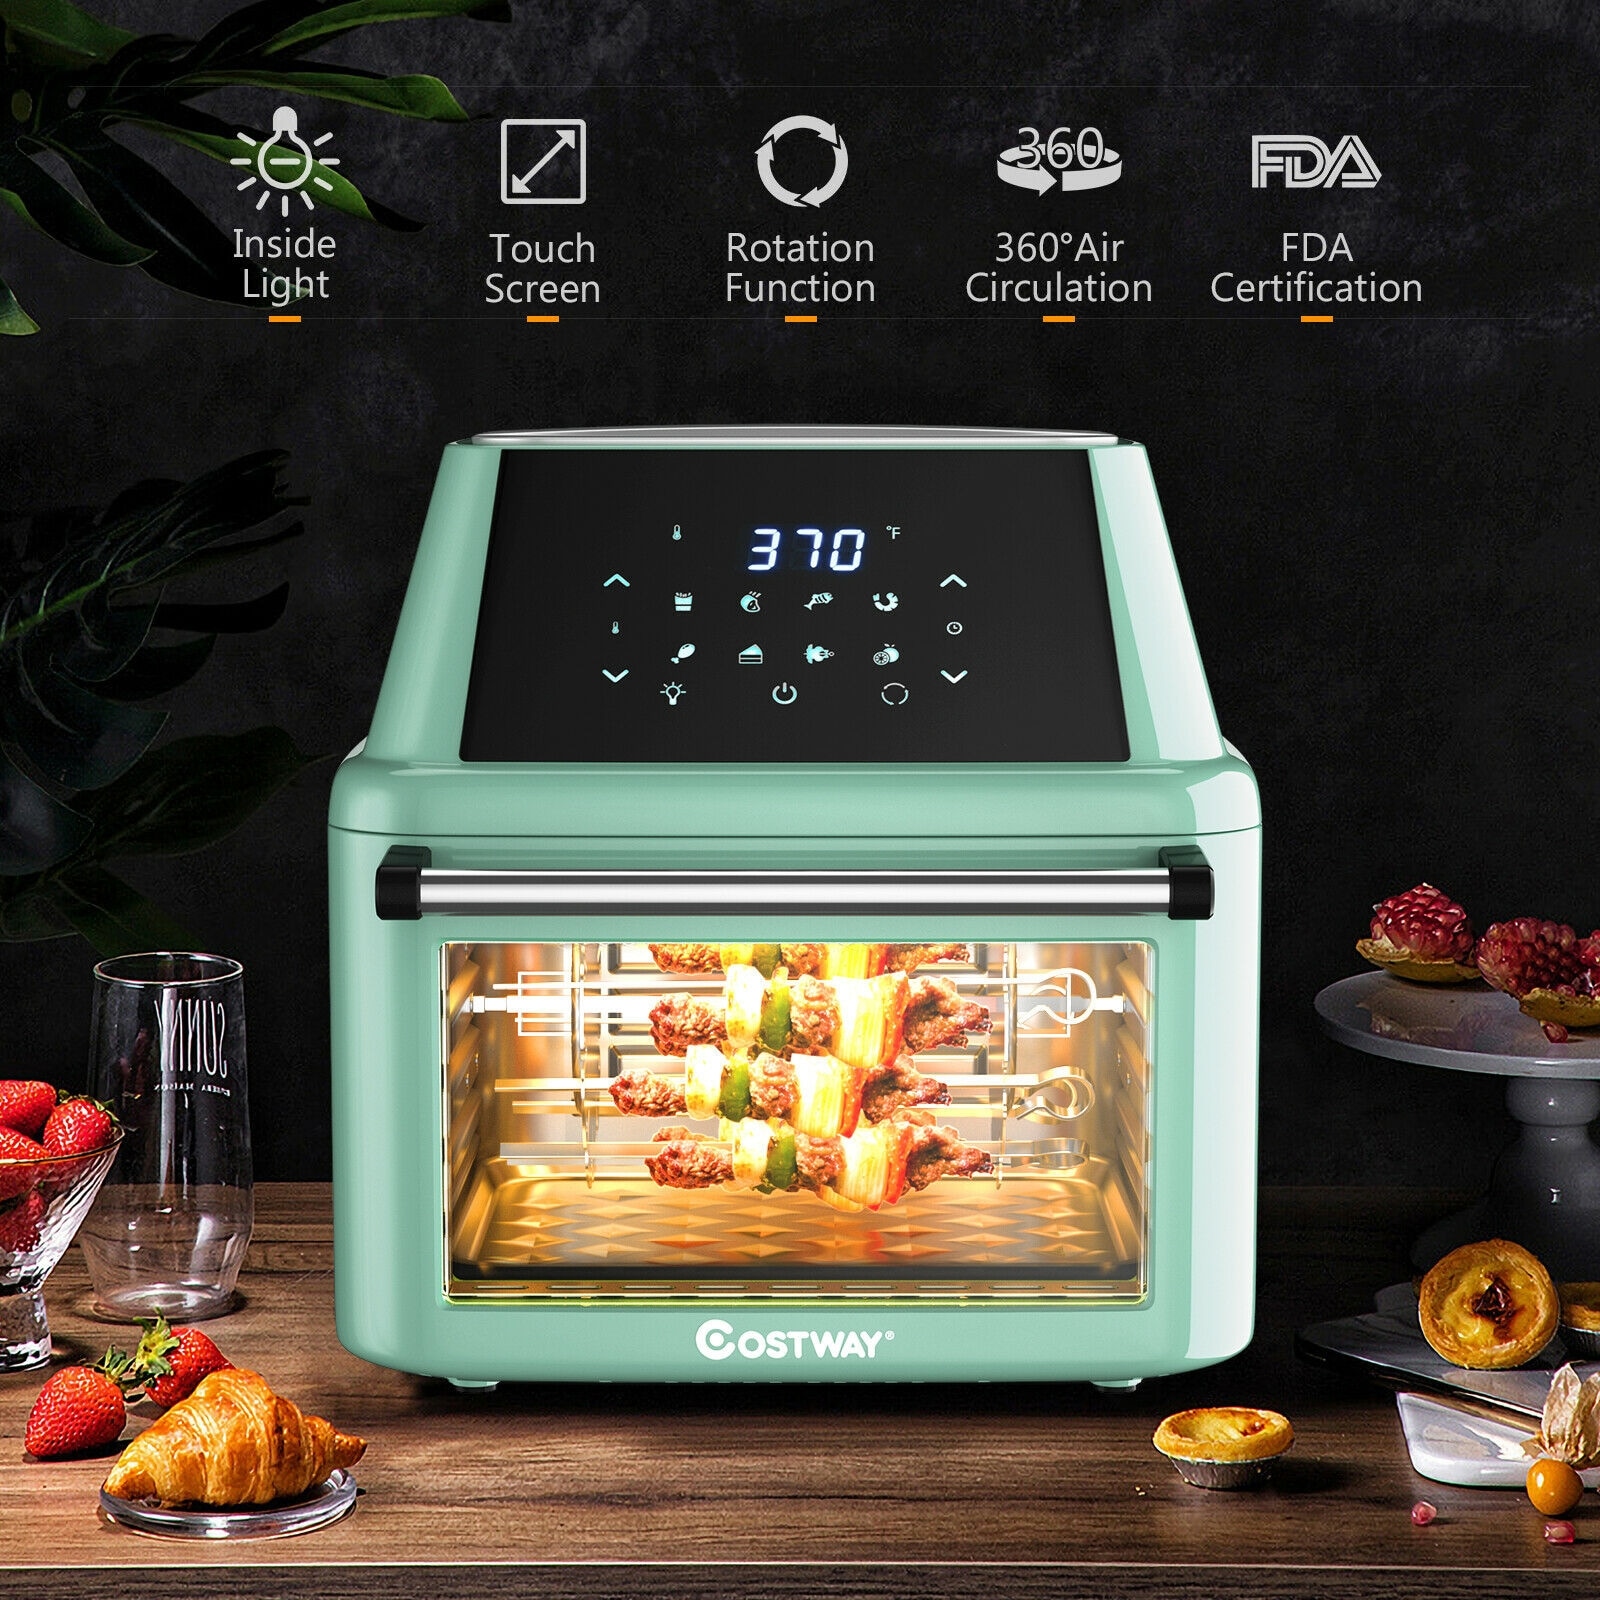 MOOSOO Dual Basket Air Fryer Oven, 2 Independent 3 Qt Baskets, with Knob  Control, Dehydrator & Bake 